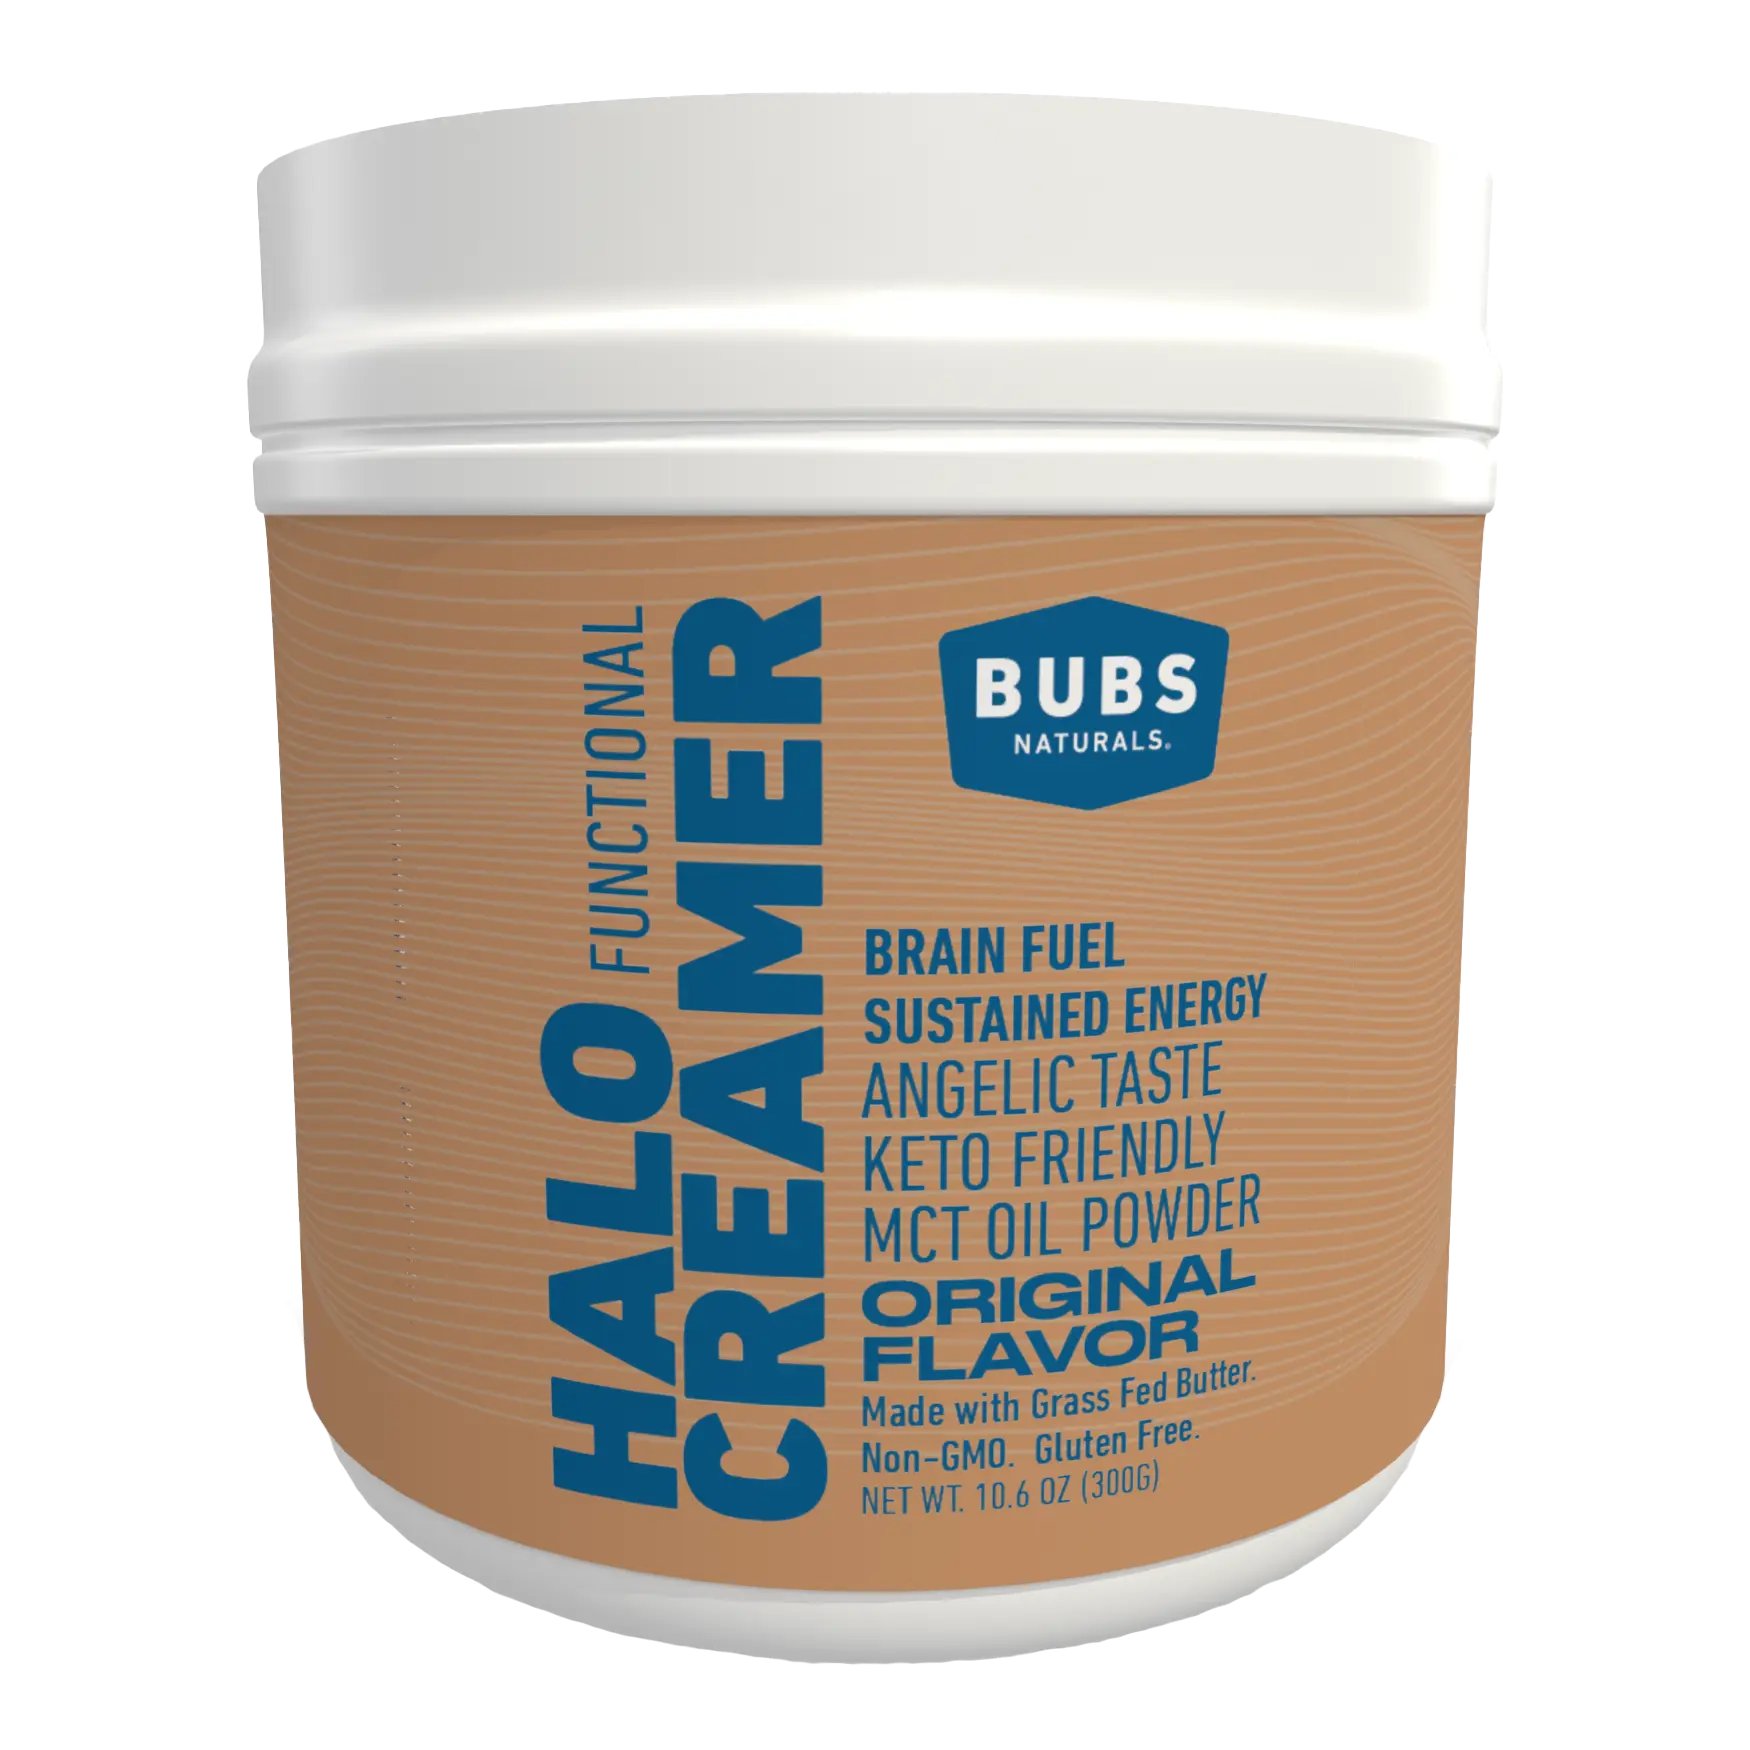 BUBS Naturals Dairy Halo Creamer Tub Front